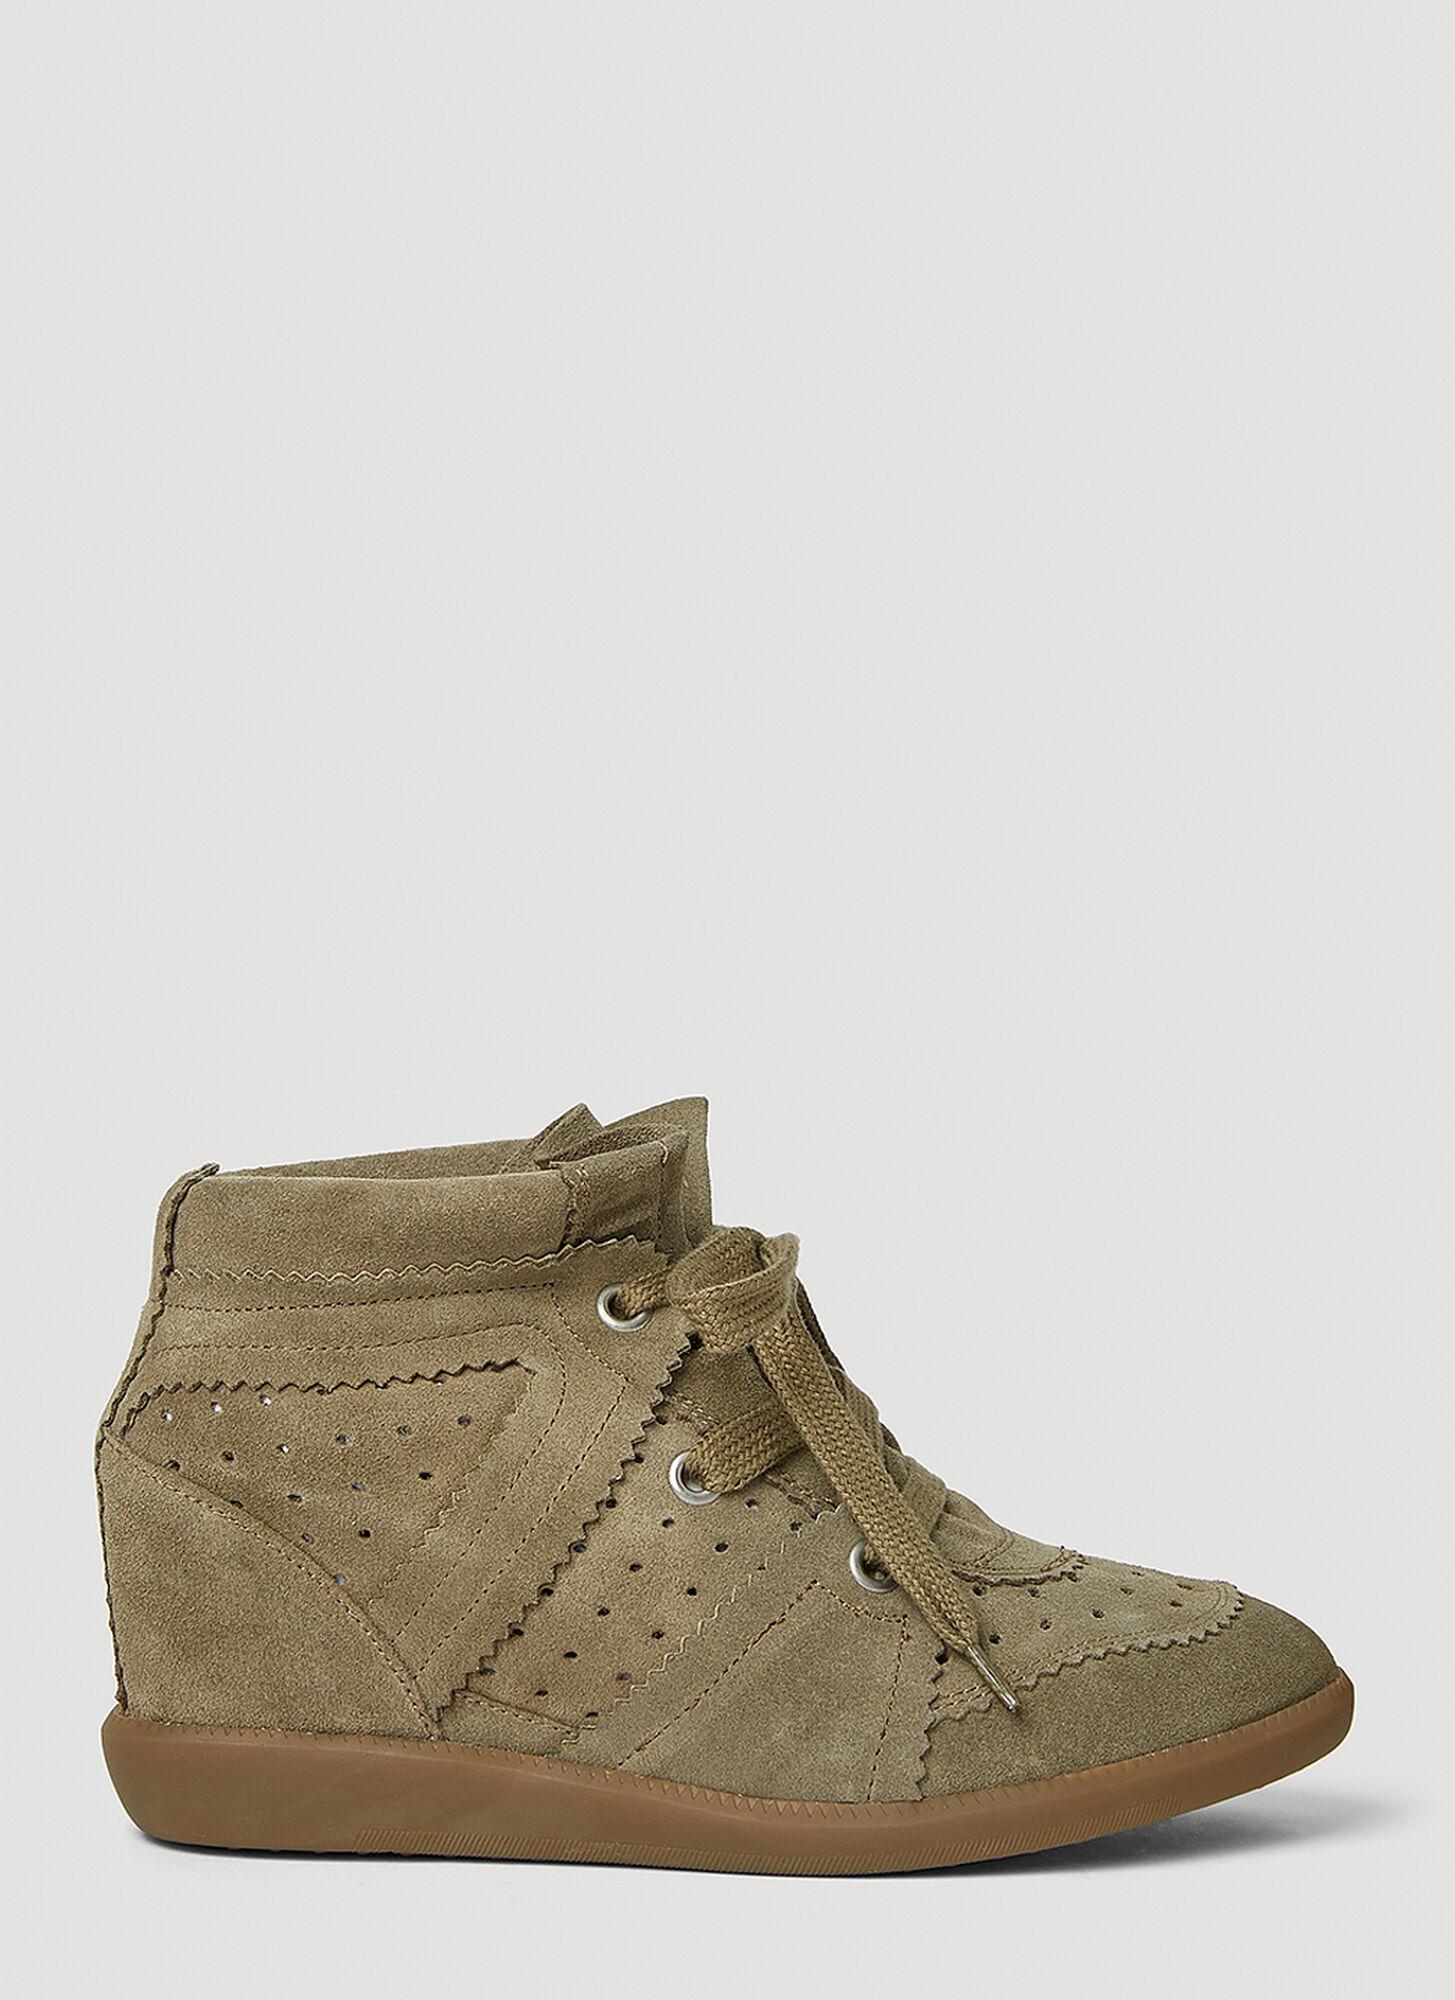 Isabel Marant Bobby Sneakers in Natural | Lyst